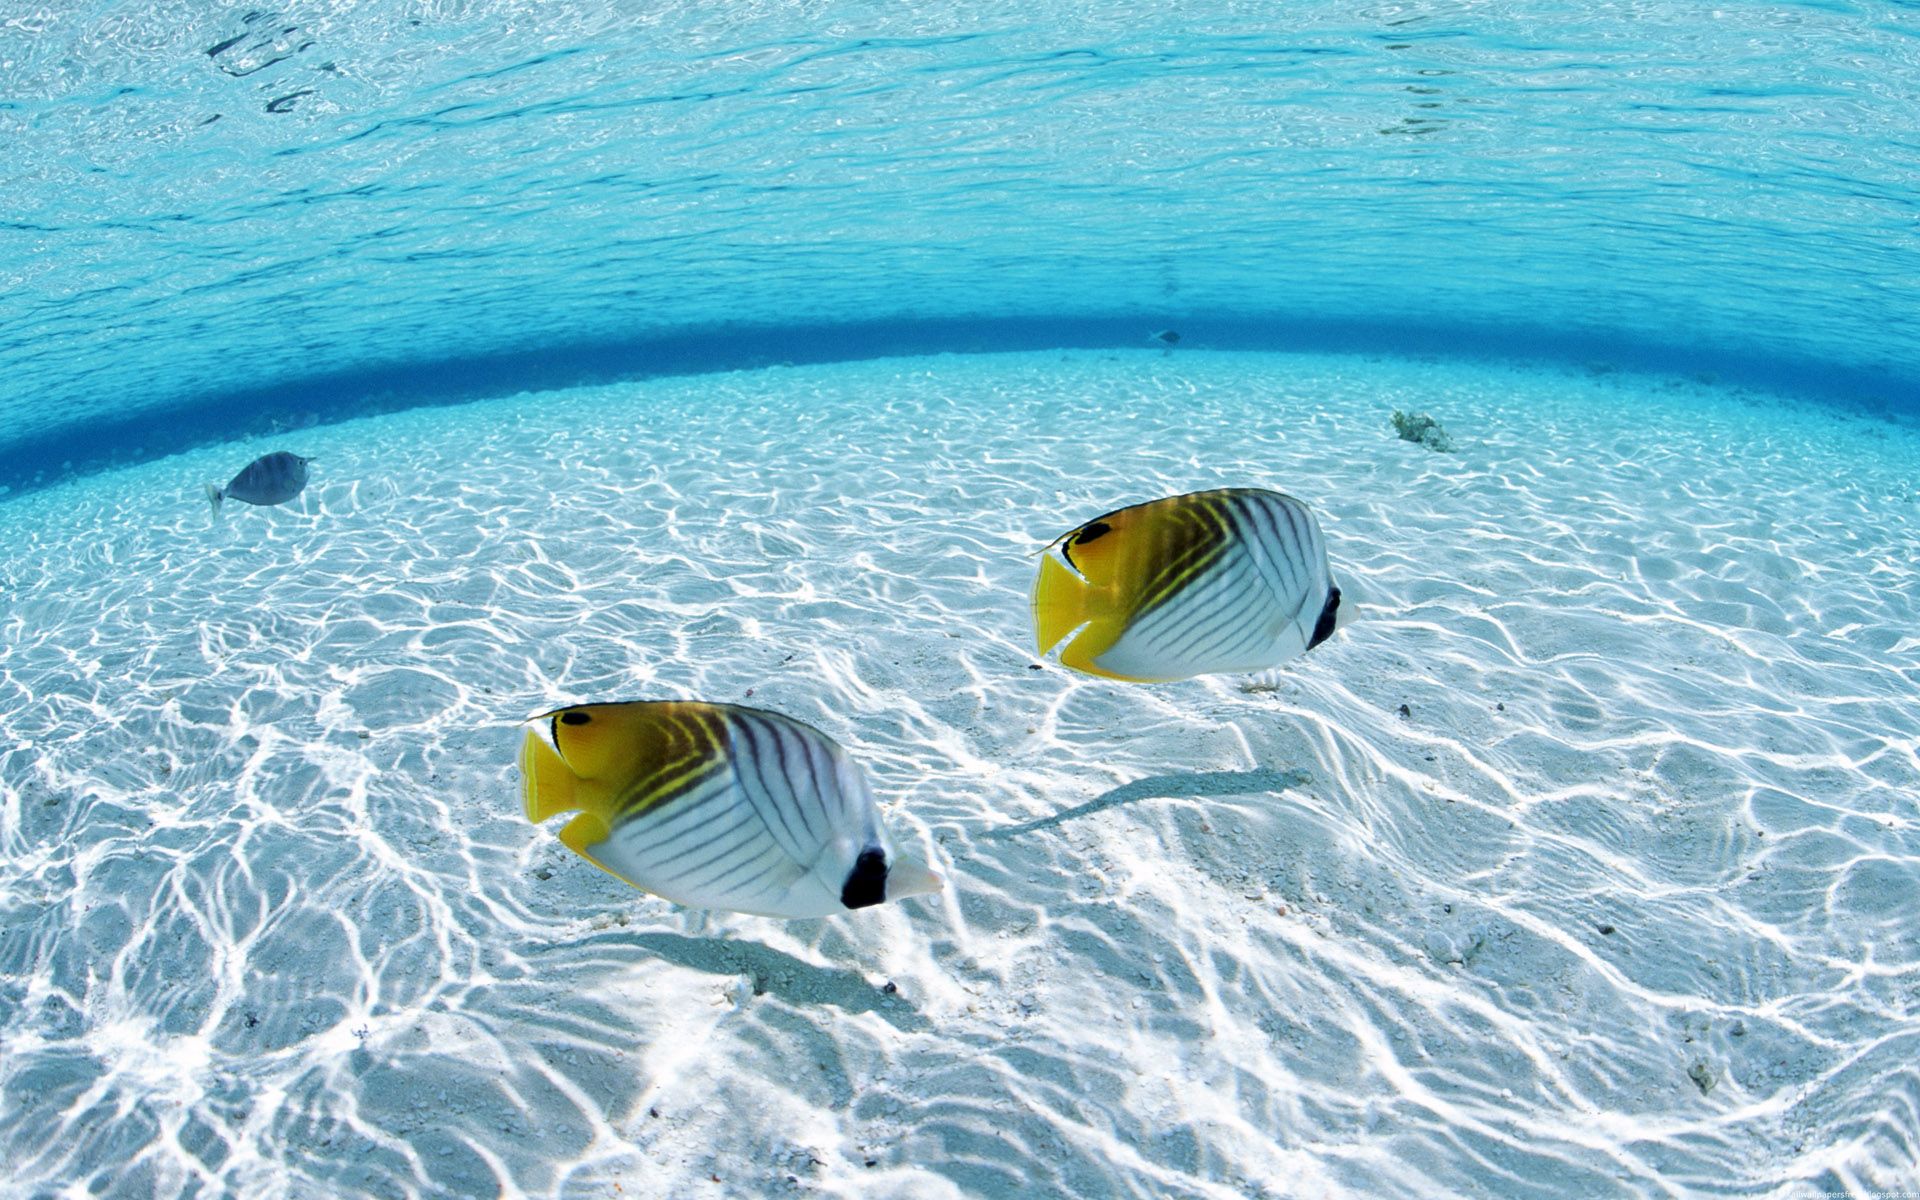 Download wallpaper 1366x768 underwater sea surface tropical island  exotic tablet laptop 1366x768 hd background 17062